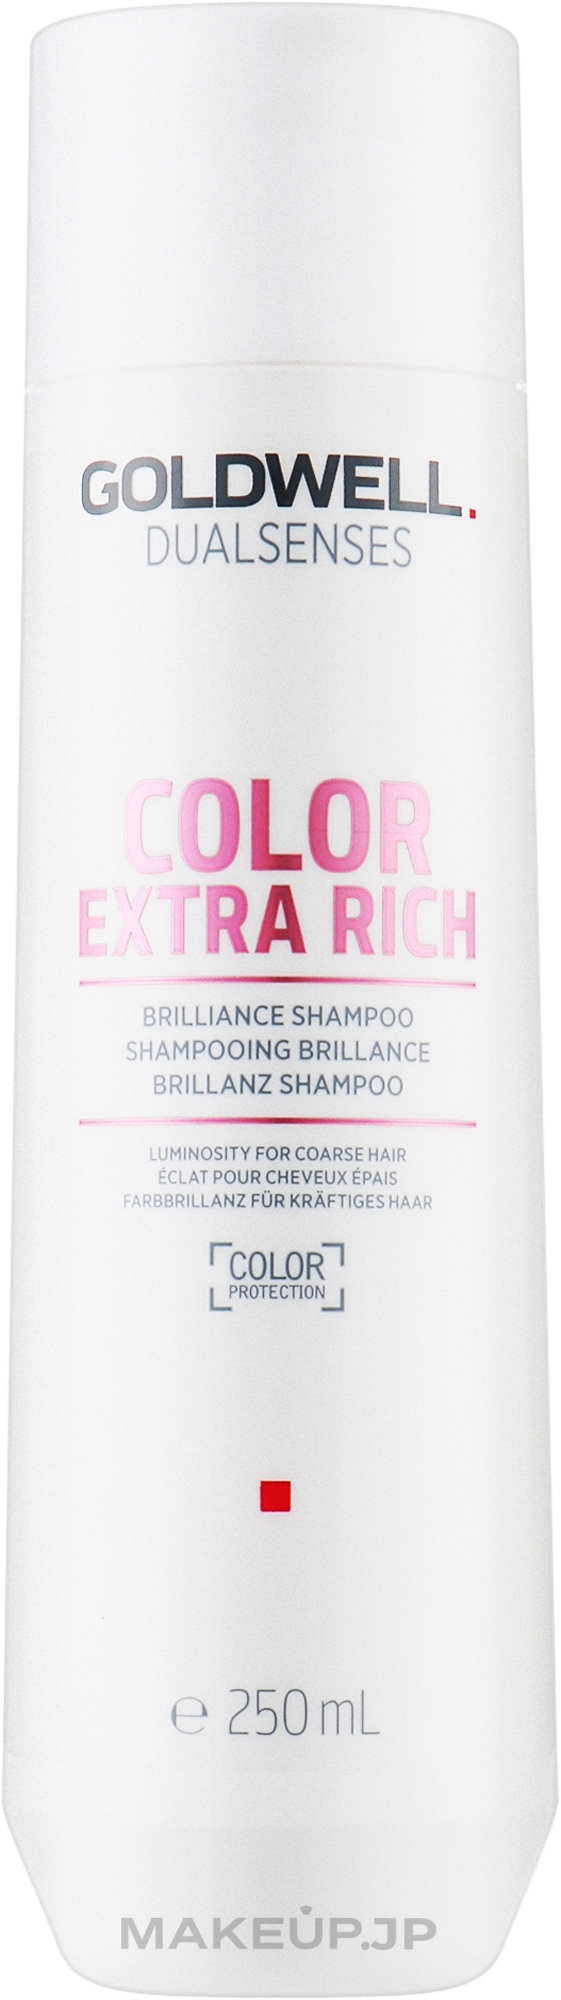 Intensive Shine Shampoo for Colored Hair - Goldwell Dualsenses Color Extra Rich Brilliance Shampoo — photo 250 ml